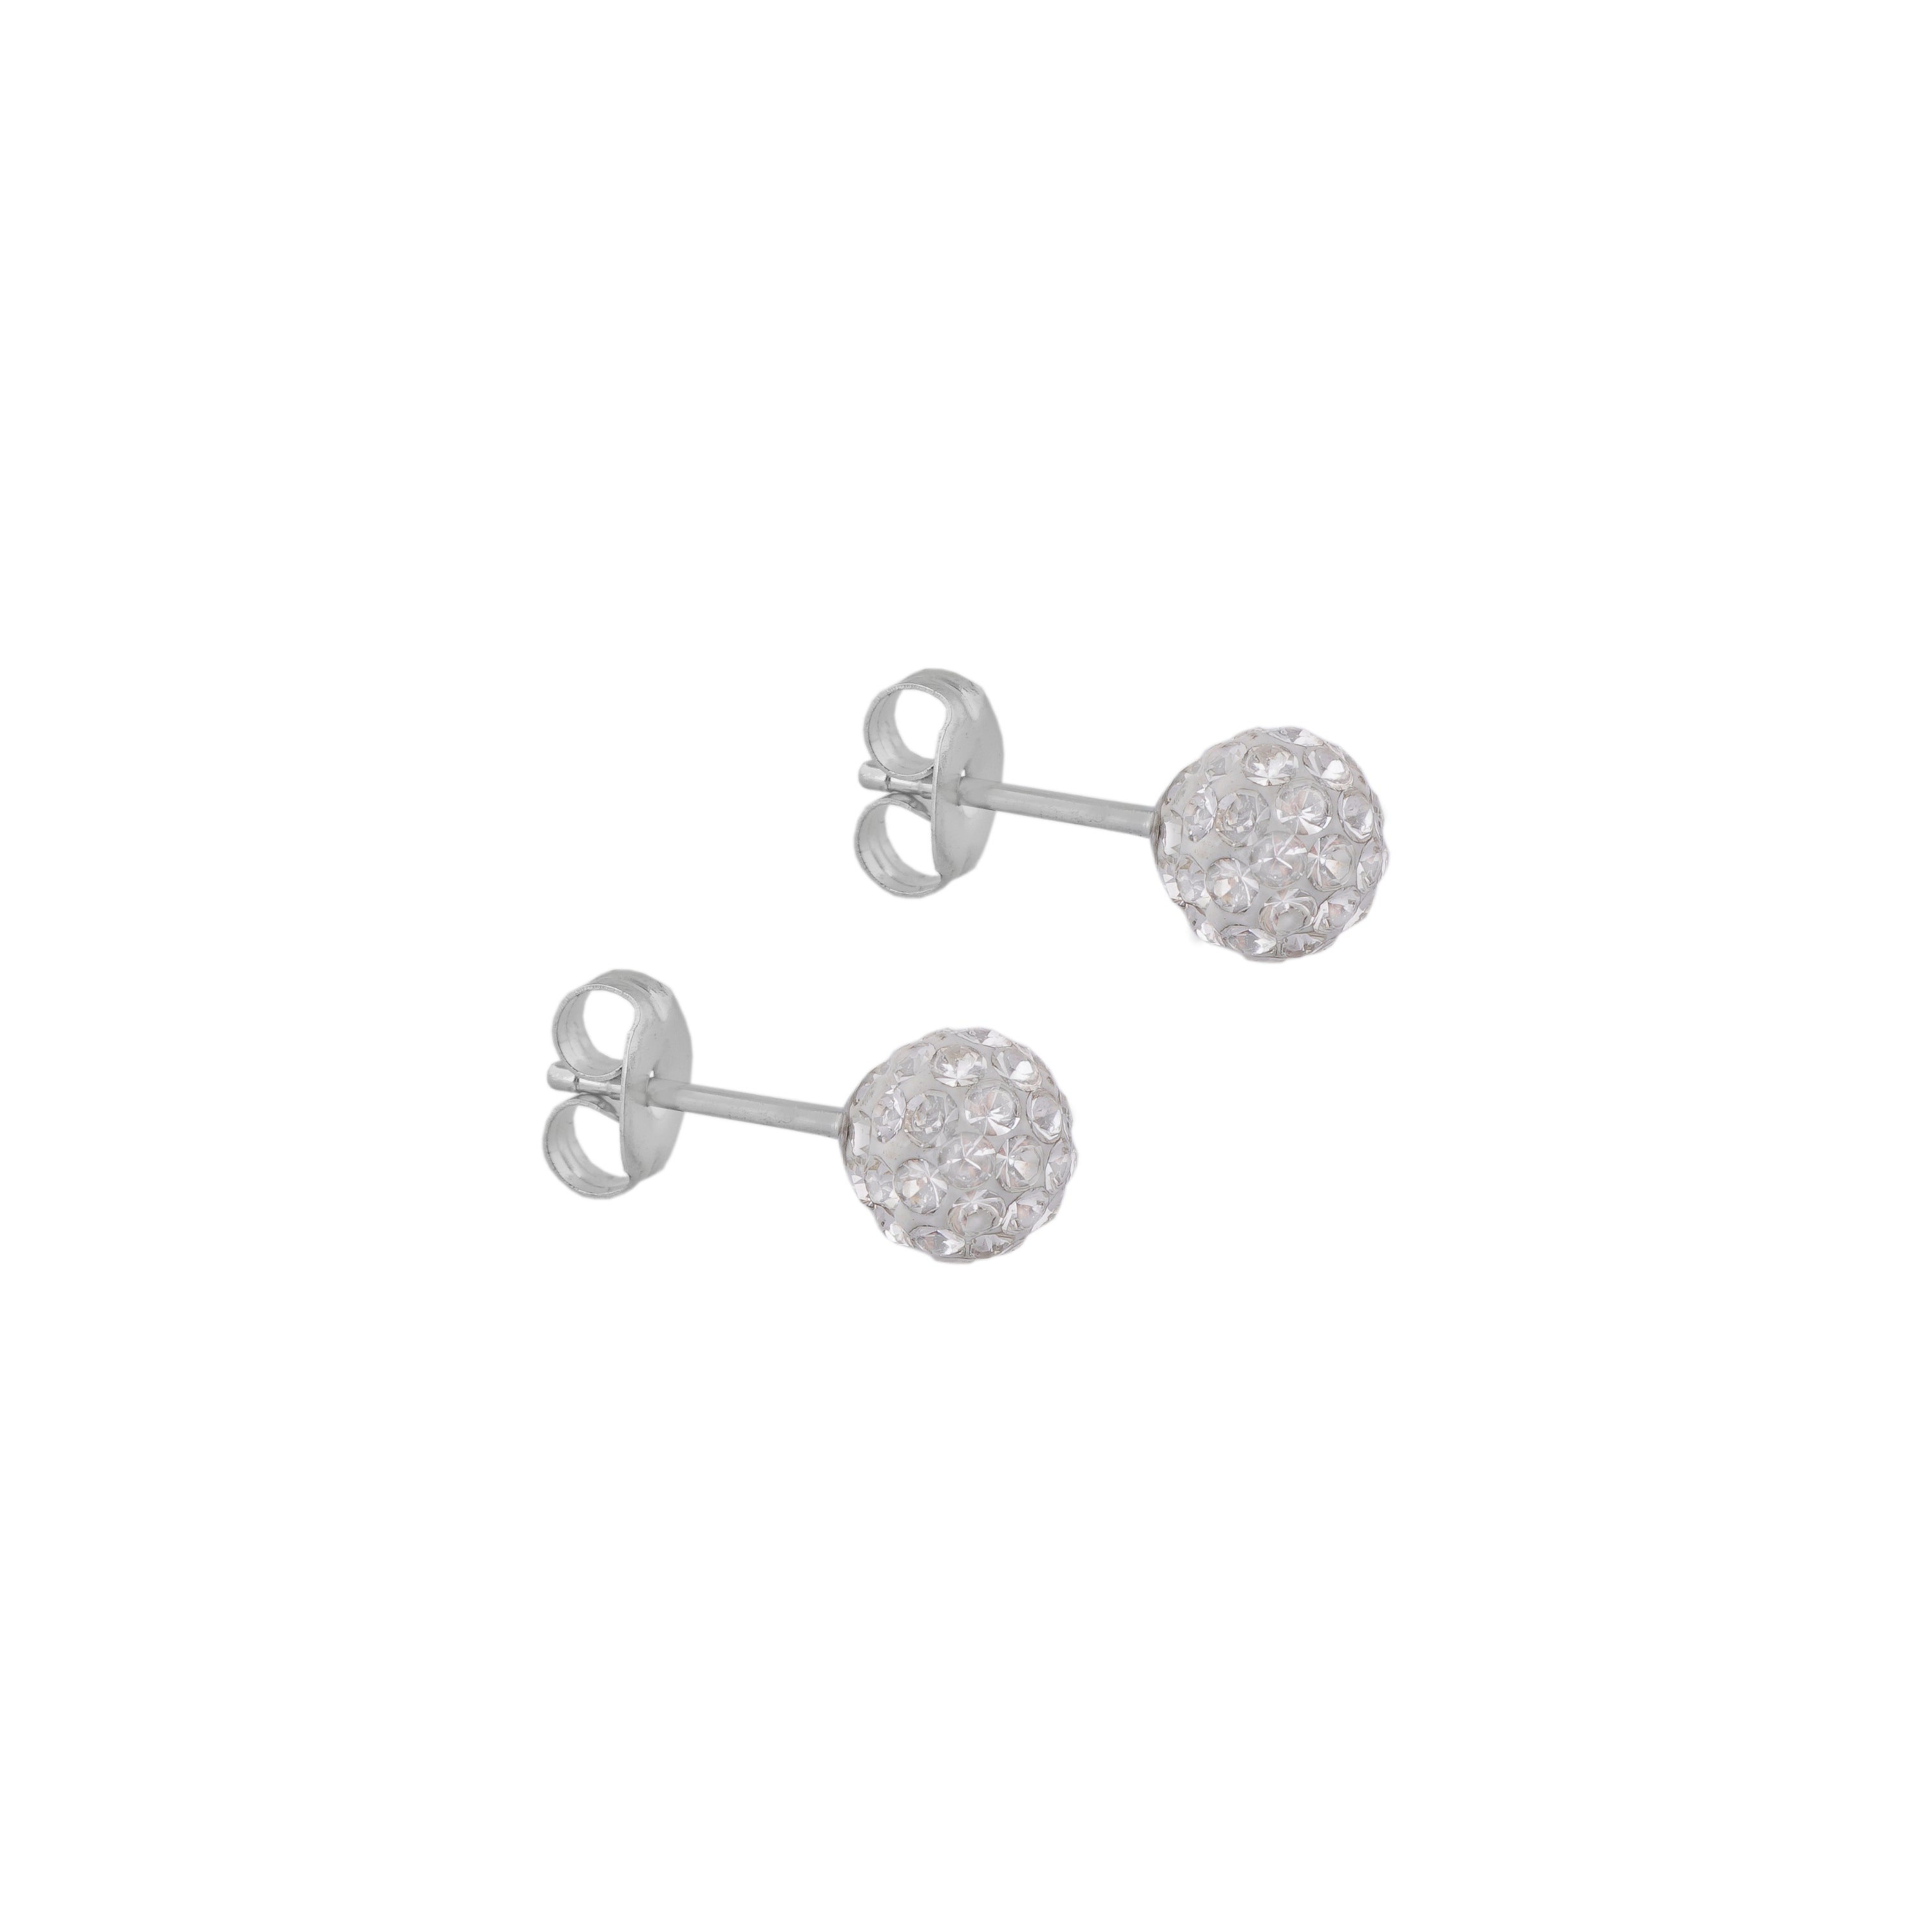 6MM Fireball Ð Crystal Allergy free Stainless Steel Ear Studs | MADE IN USA | Ideal for everyday wear